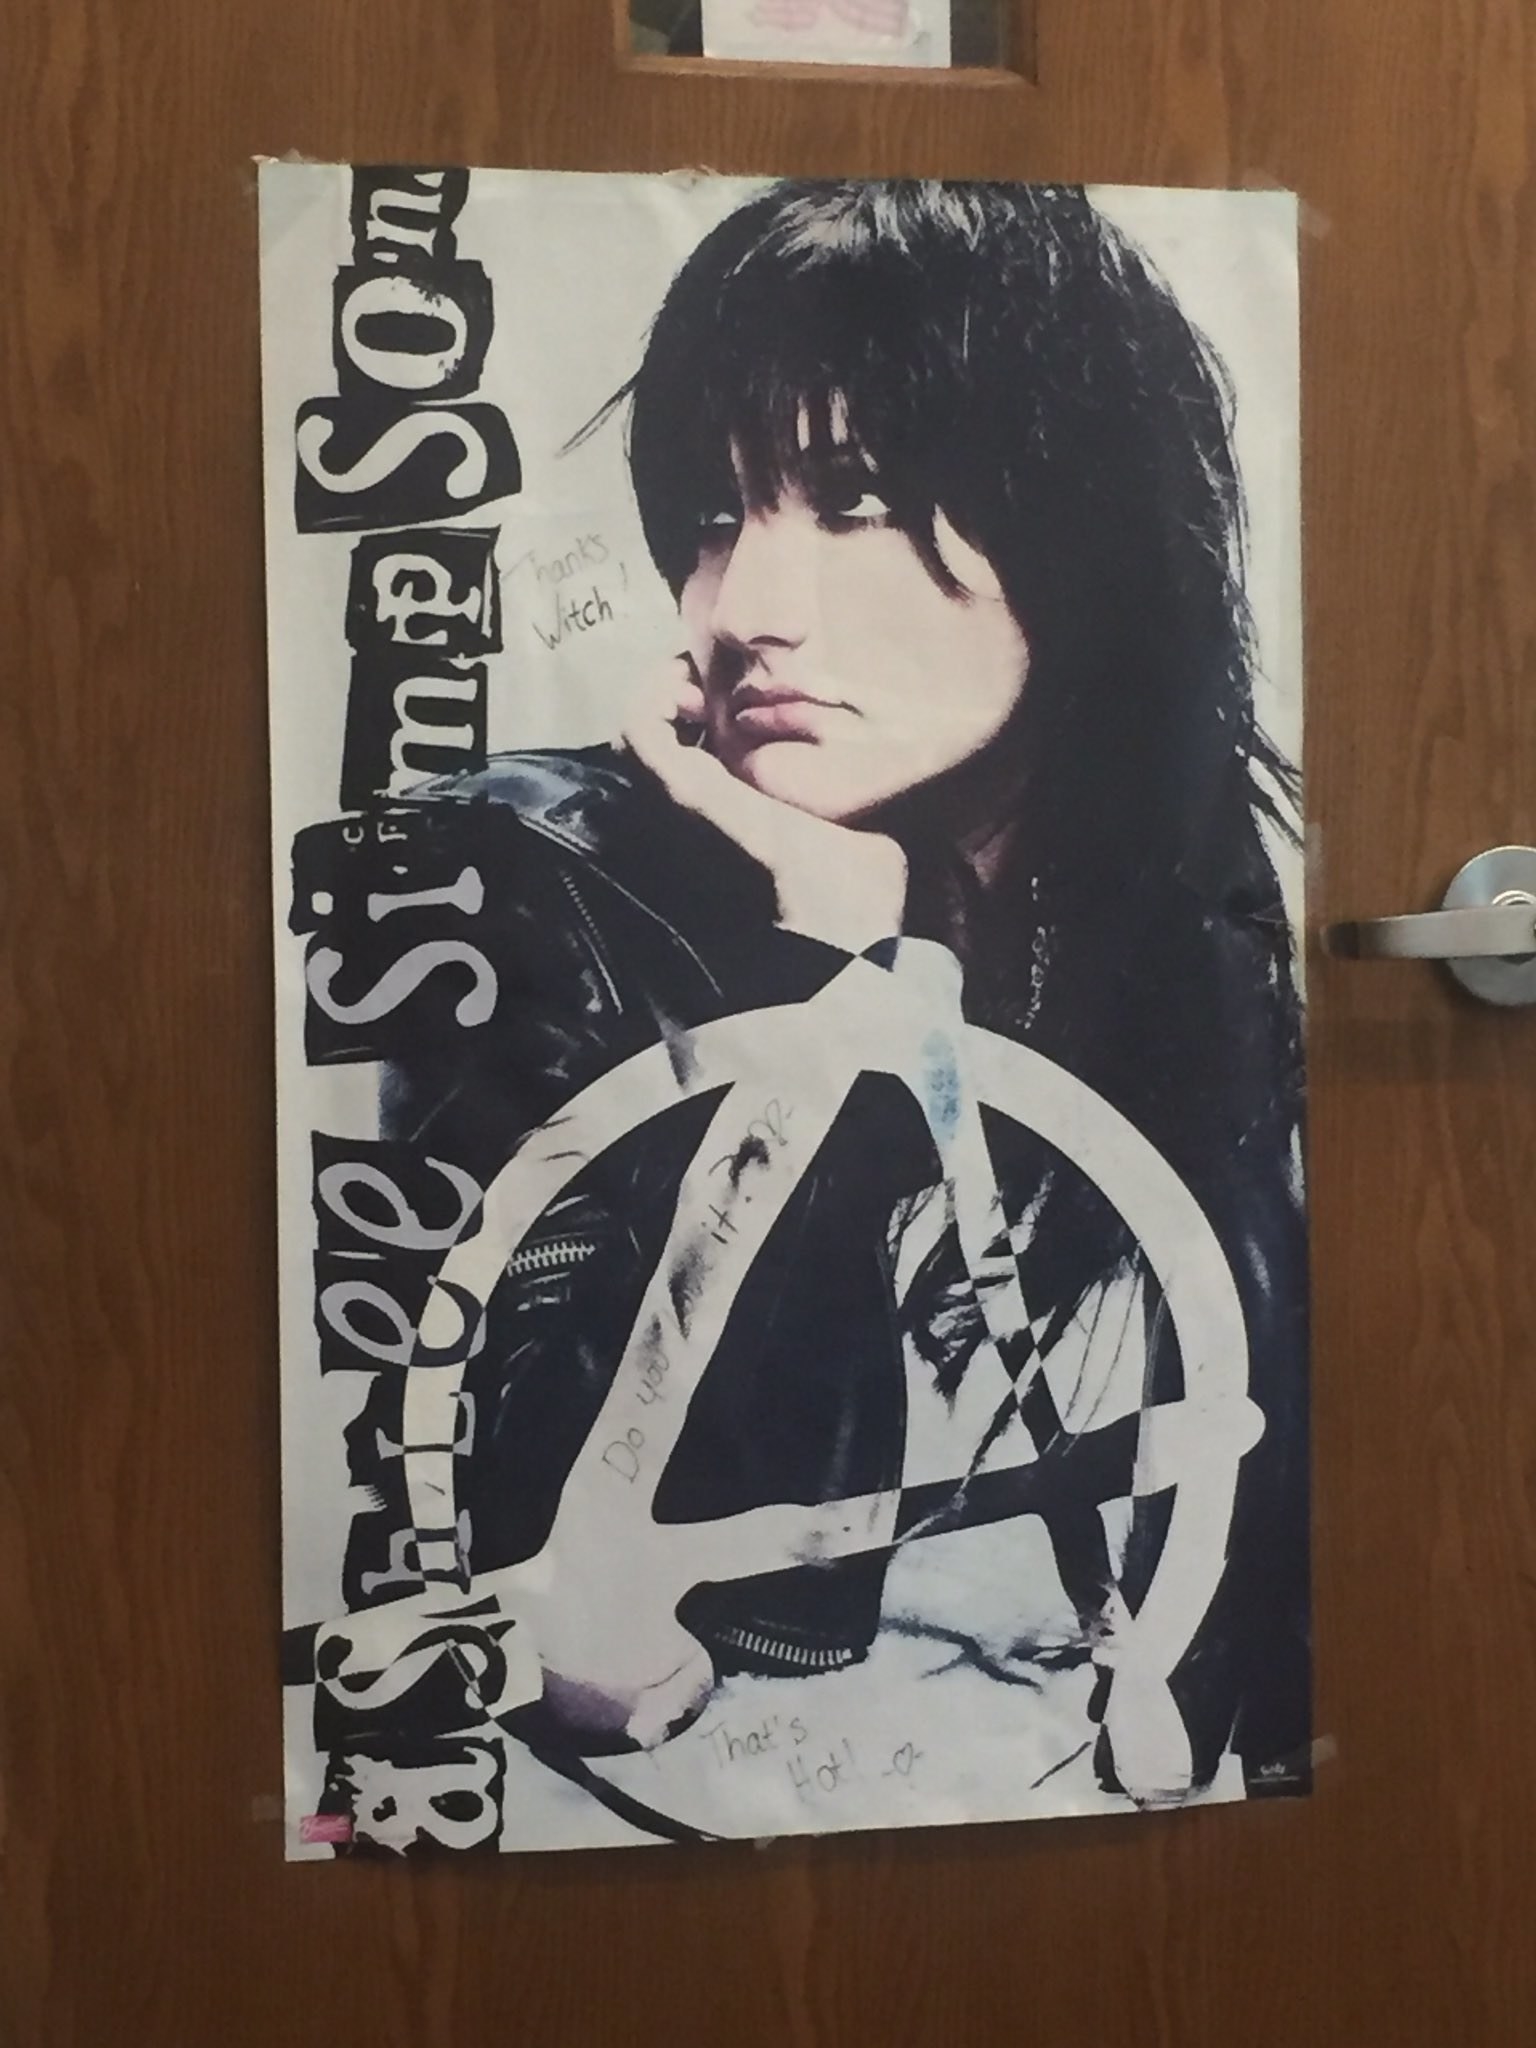 A poster of Ashlee Simpson